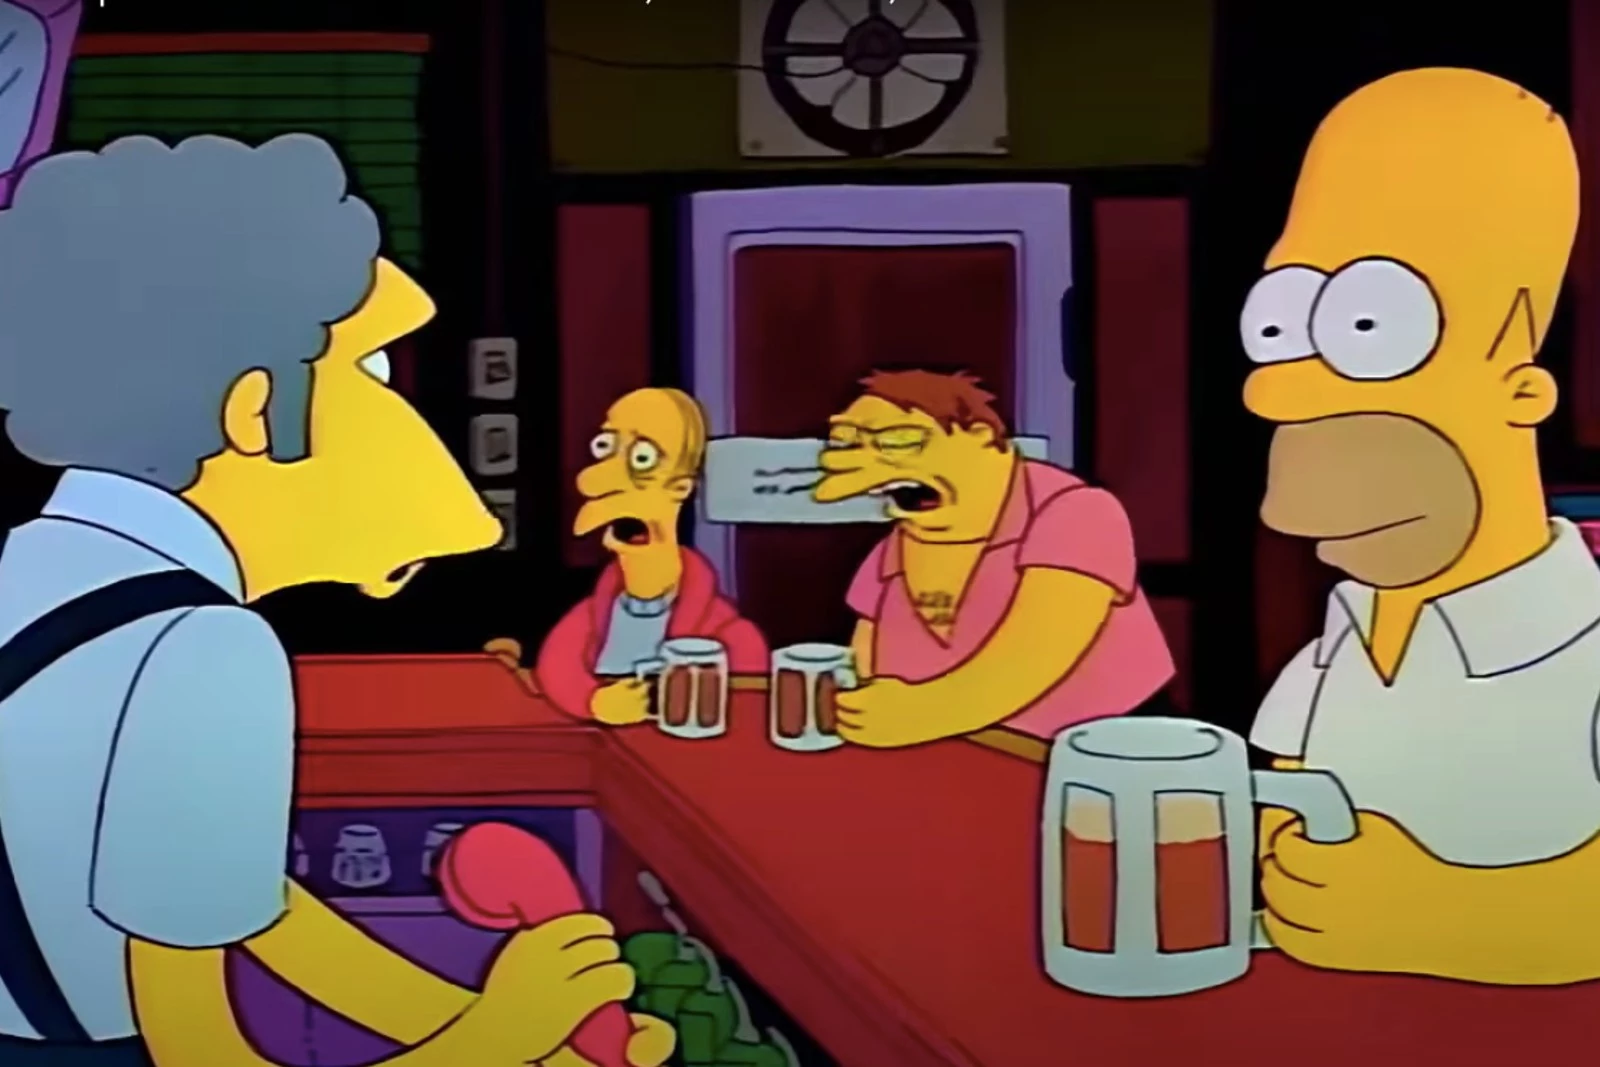 Fans of 'The Simpsons' can soon drink at Moe's in Wildwood, NJ